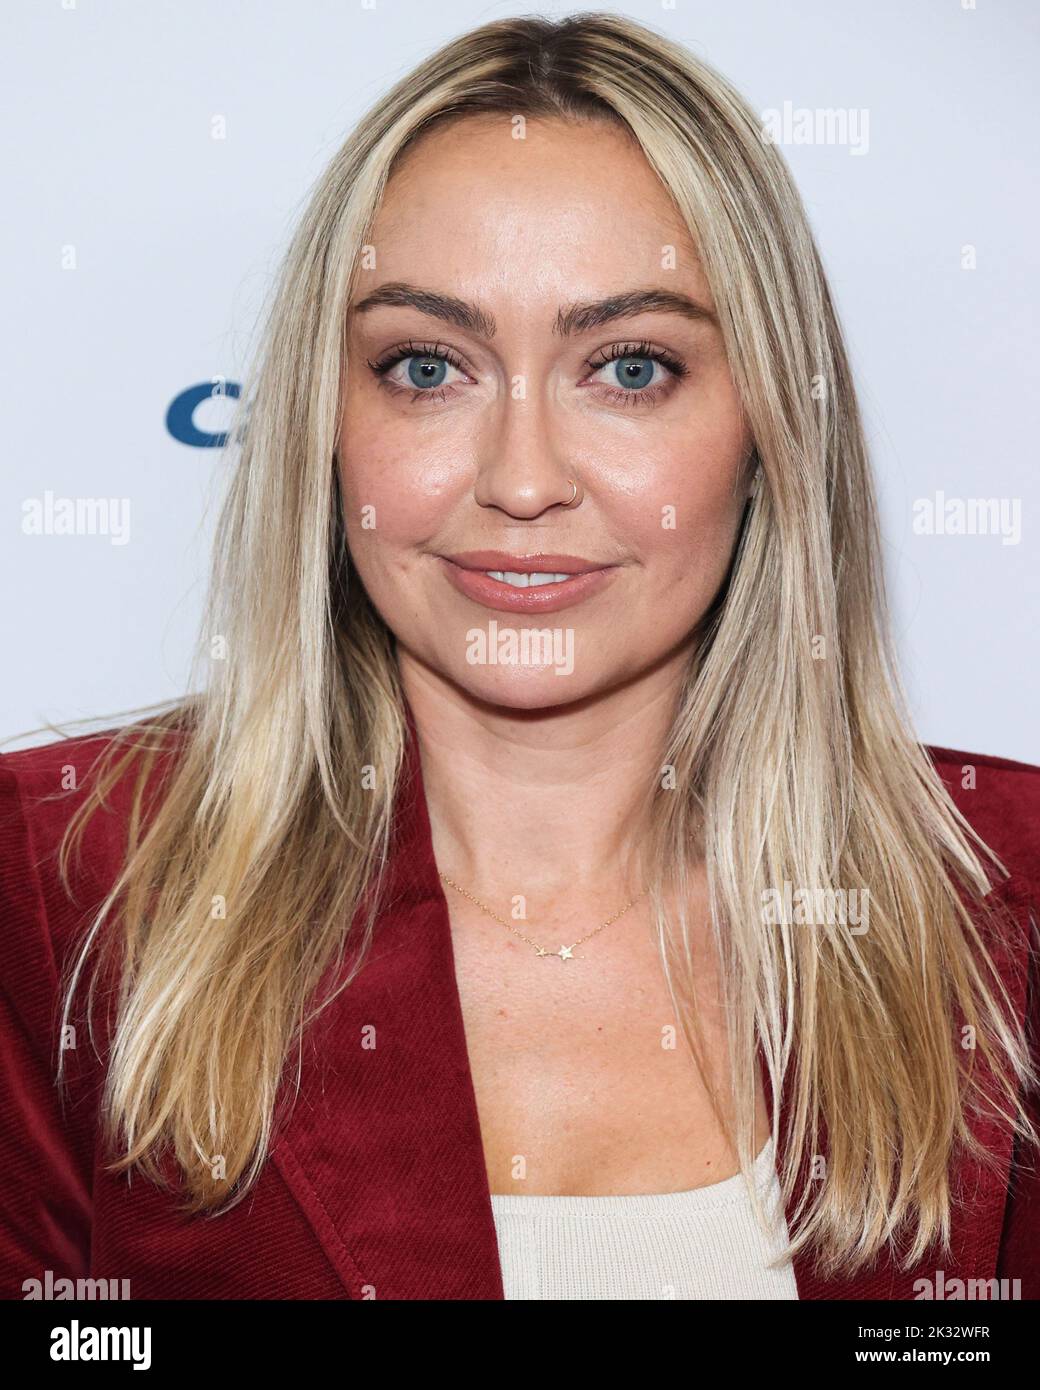 LAS VEGAS, NEVADA, USA - SEPTEMBER 23: Brandi Cyrus poses in the press room at the 2022 iHeartRadio Music Festival - Night 1 held at the T-Mobile Arena on September 23, 2022 in Las Vegas, Nevada, United States. (Photo by Xavier Collin/Image Press Agency) Stock Photo